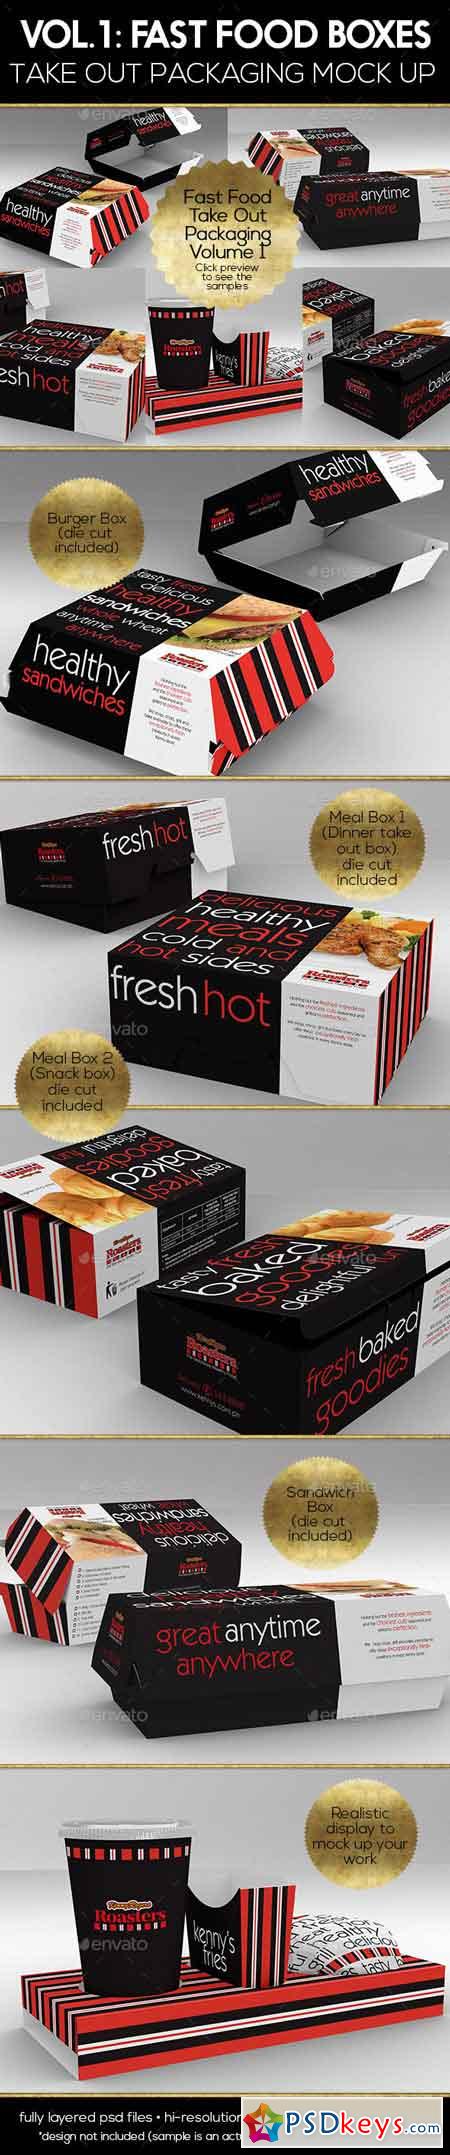 Download Fast Food Boxes Vol.1 Take Out Packaging Mock Ups 17655156 » Free Download Photoshop Vector ...